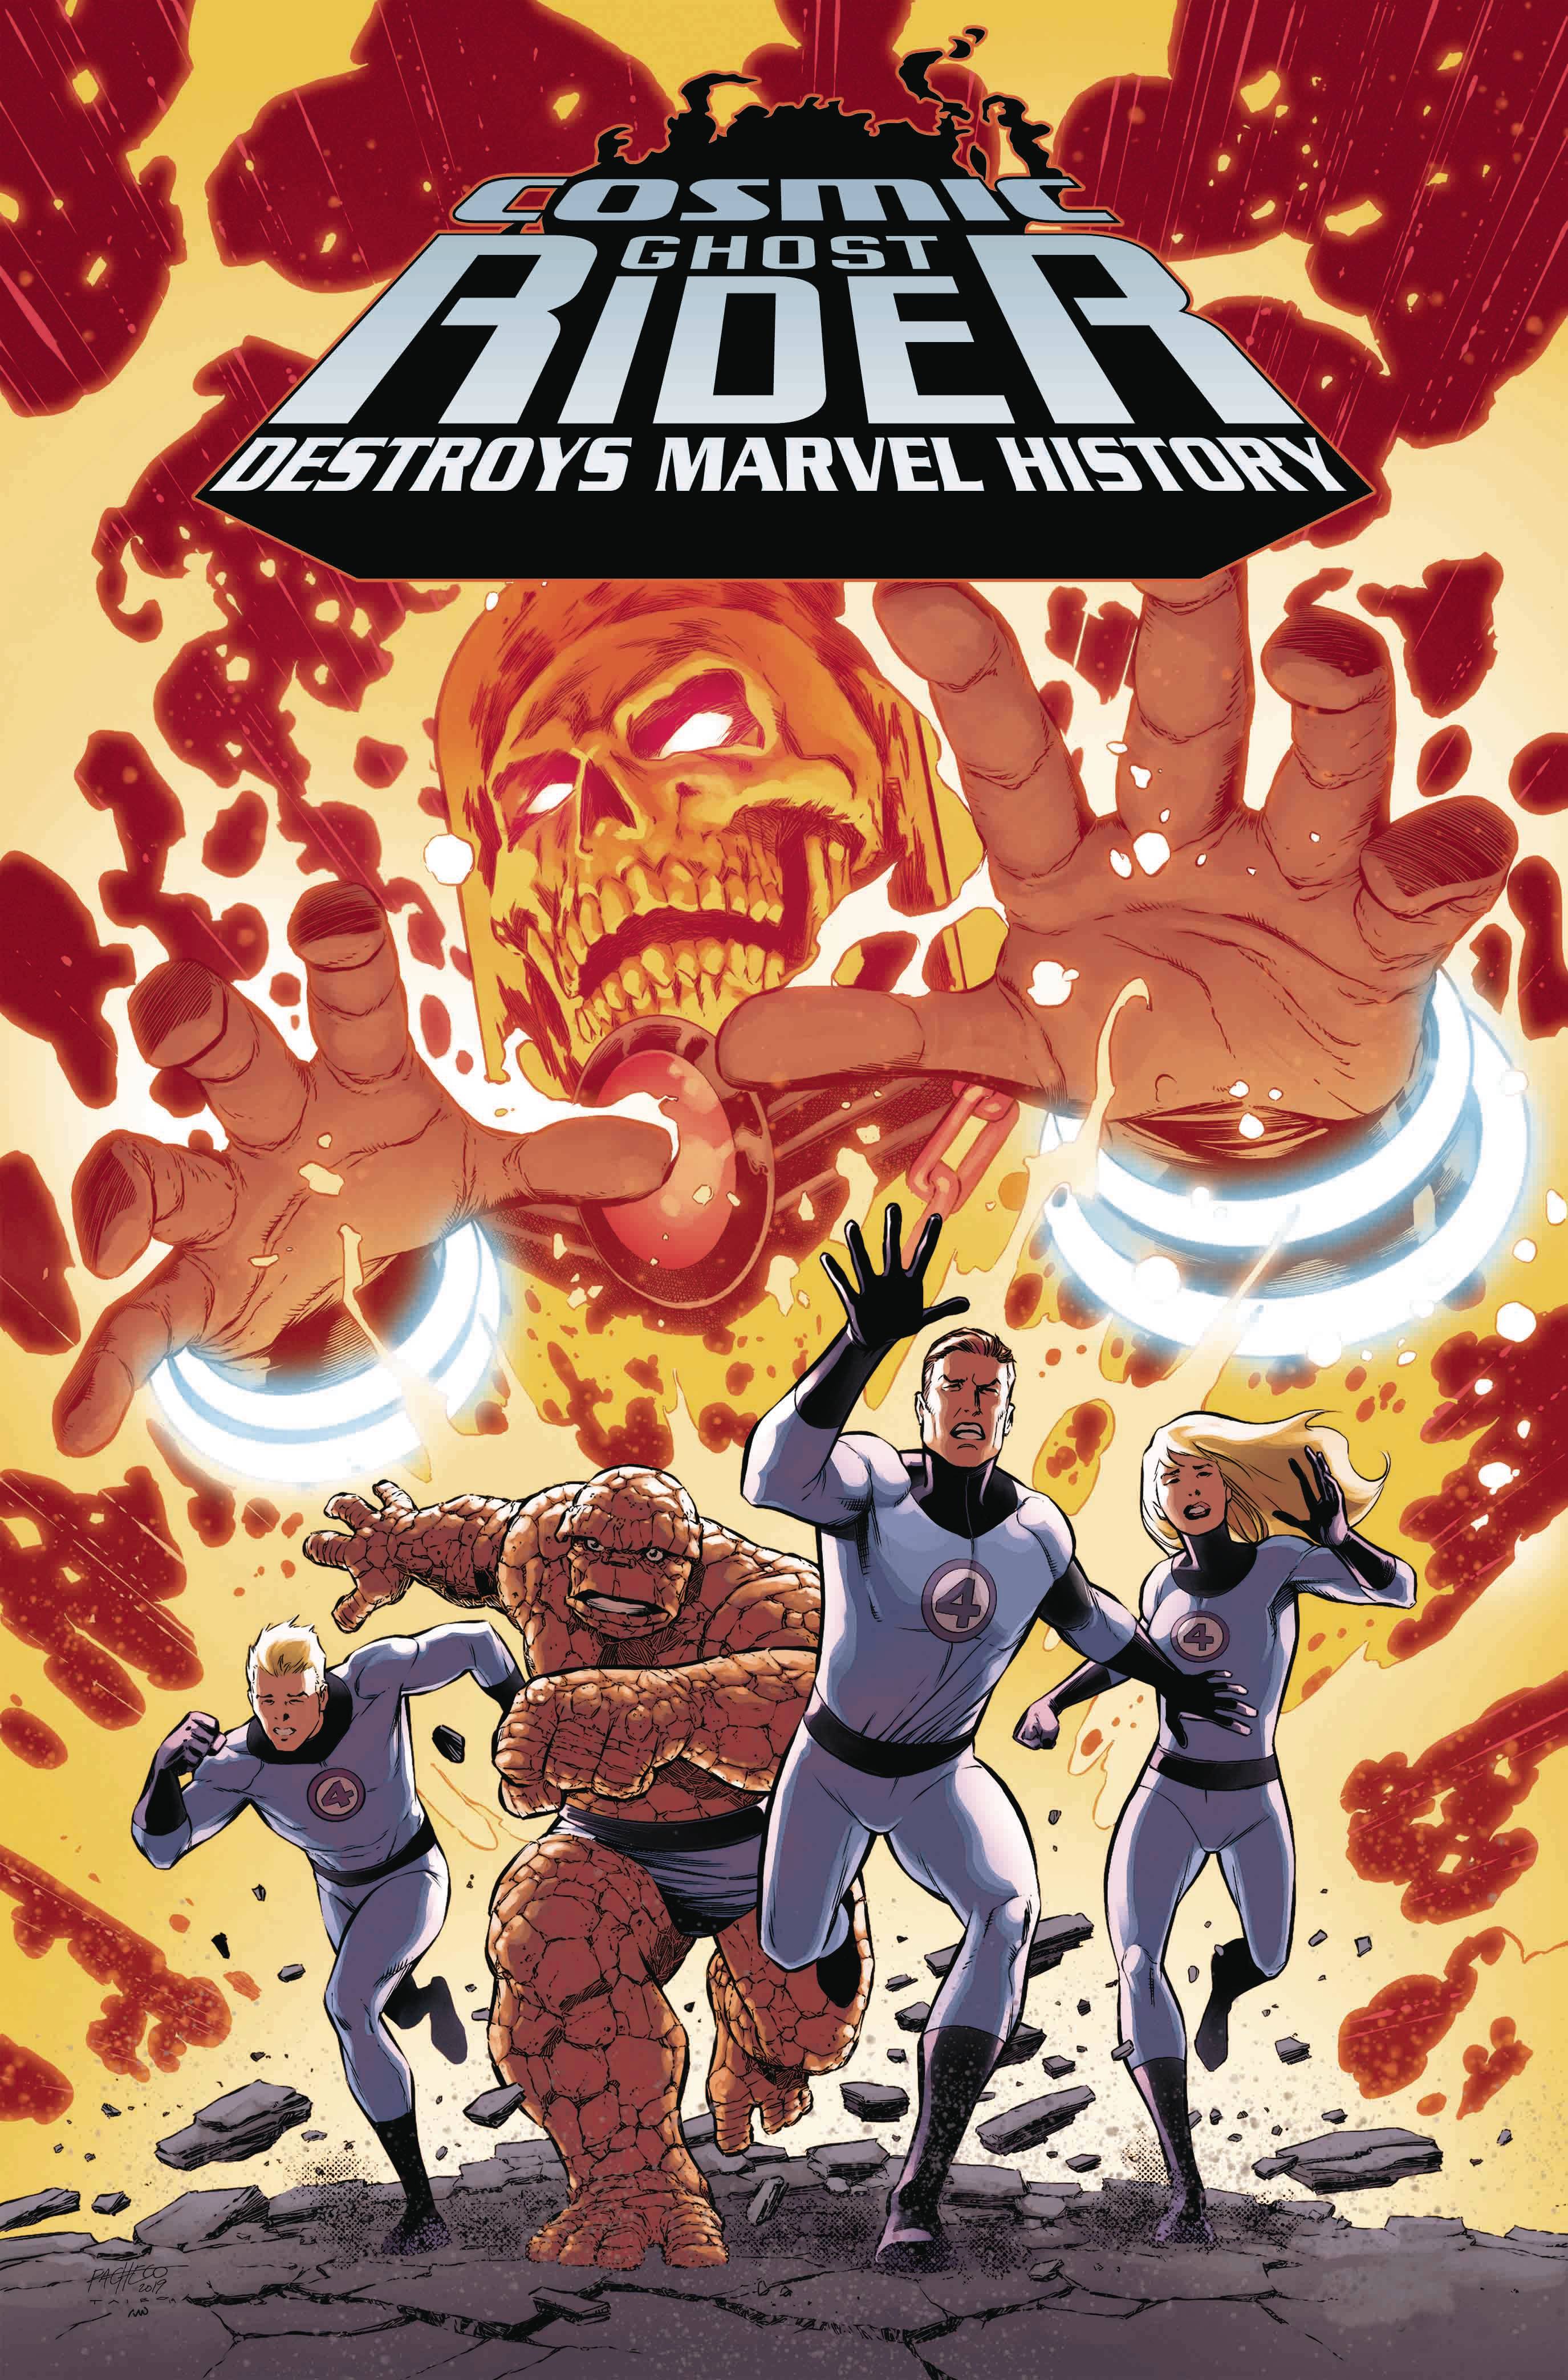 COSMIC GHOST RIDER DESTROYS MARVEL HISTORY #1 (OF 6) PACHECO 1:10 VARIANT 03/06/19 foc 02/11/19